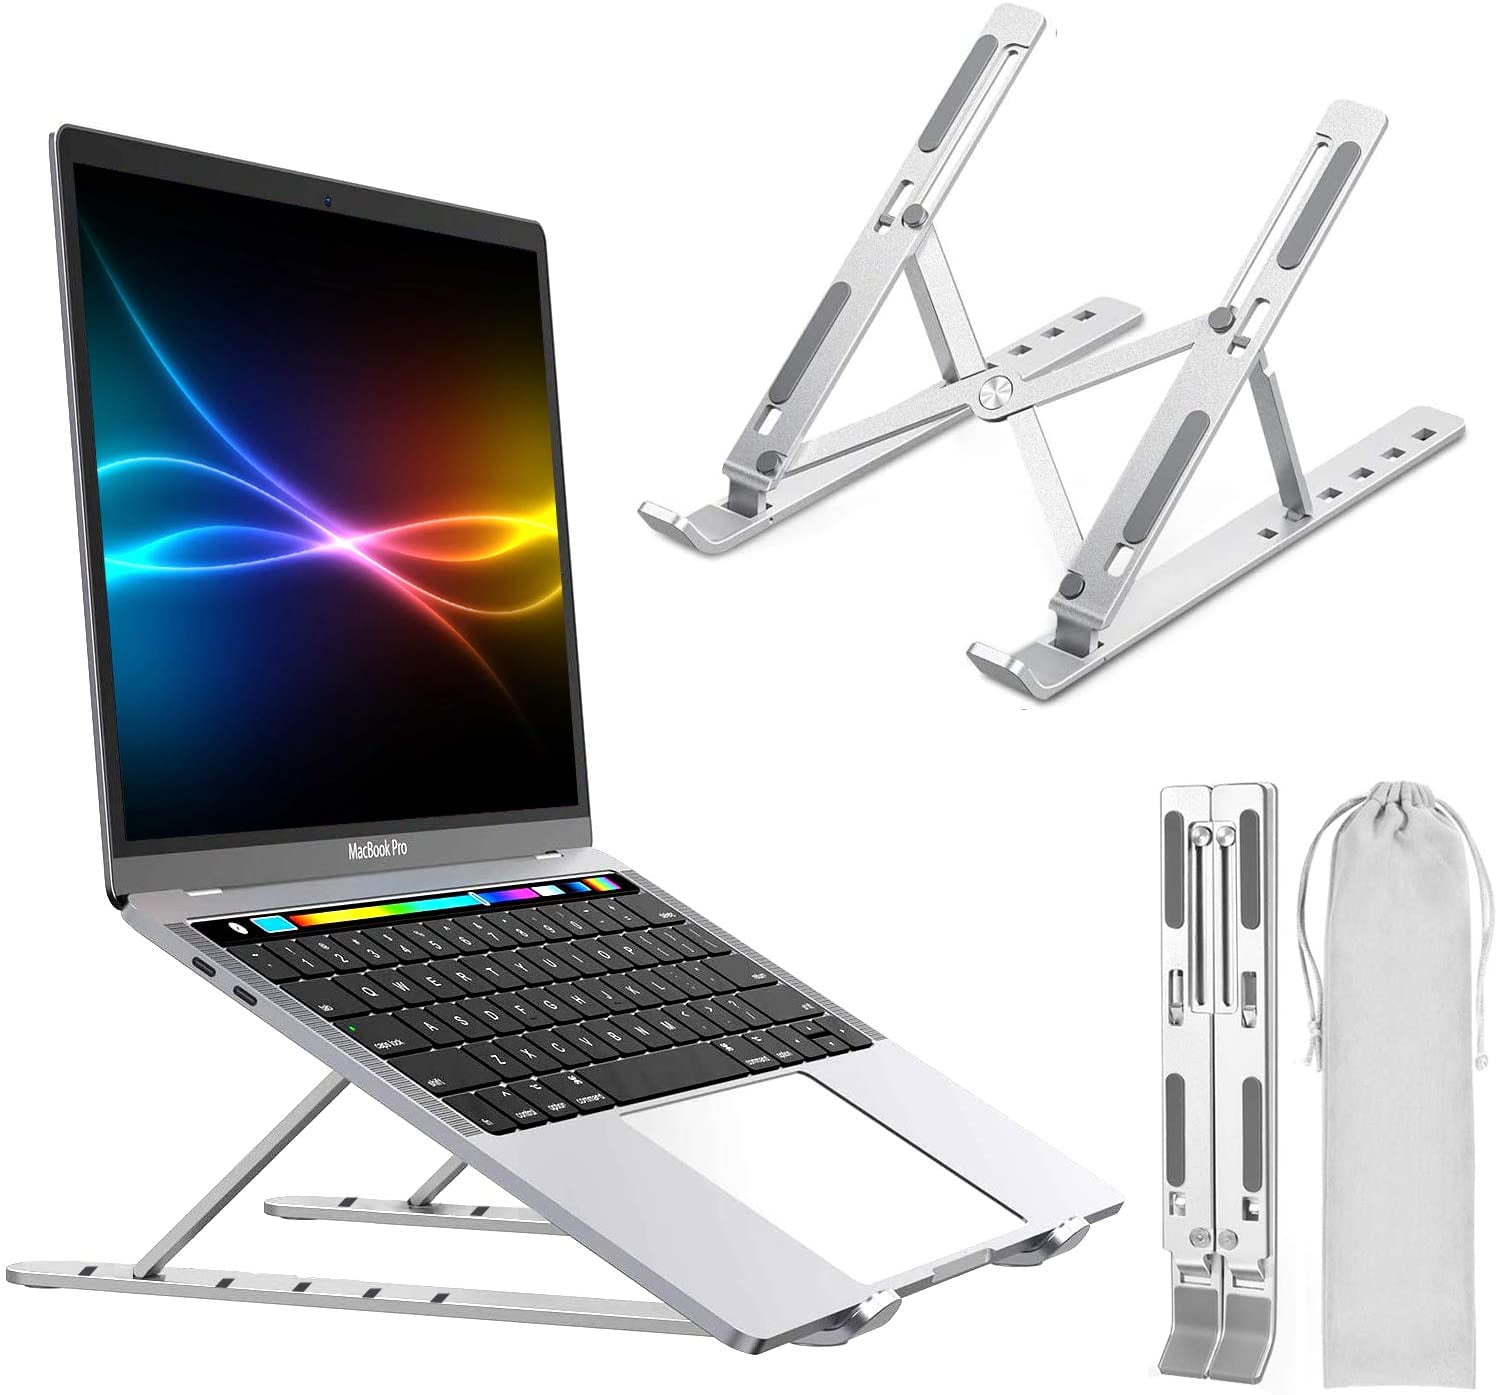 HP Dell XPS 10-15.6” Laptops Ergonomic Laptop Stand,GOODBONG Adjustable Aluminum Laptop Computer Stand Tablet Stand,Ergonomic Foldable Portable Desktop Holder Compatible with MacBook Air Pro 